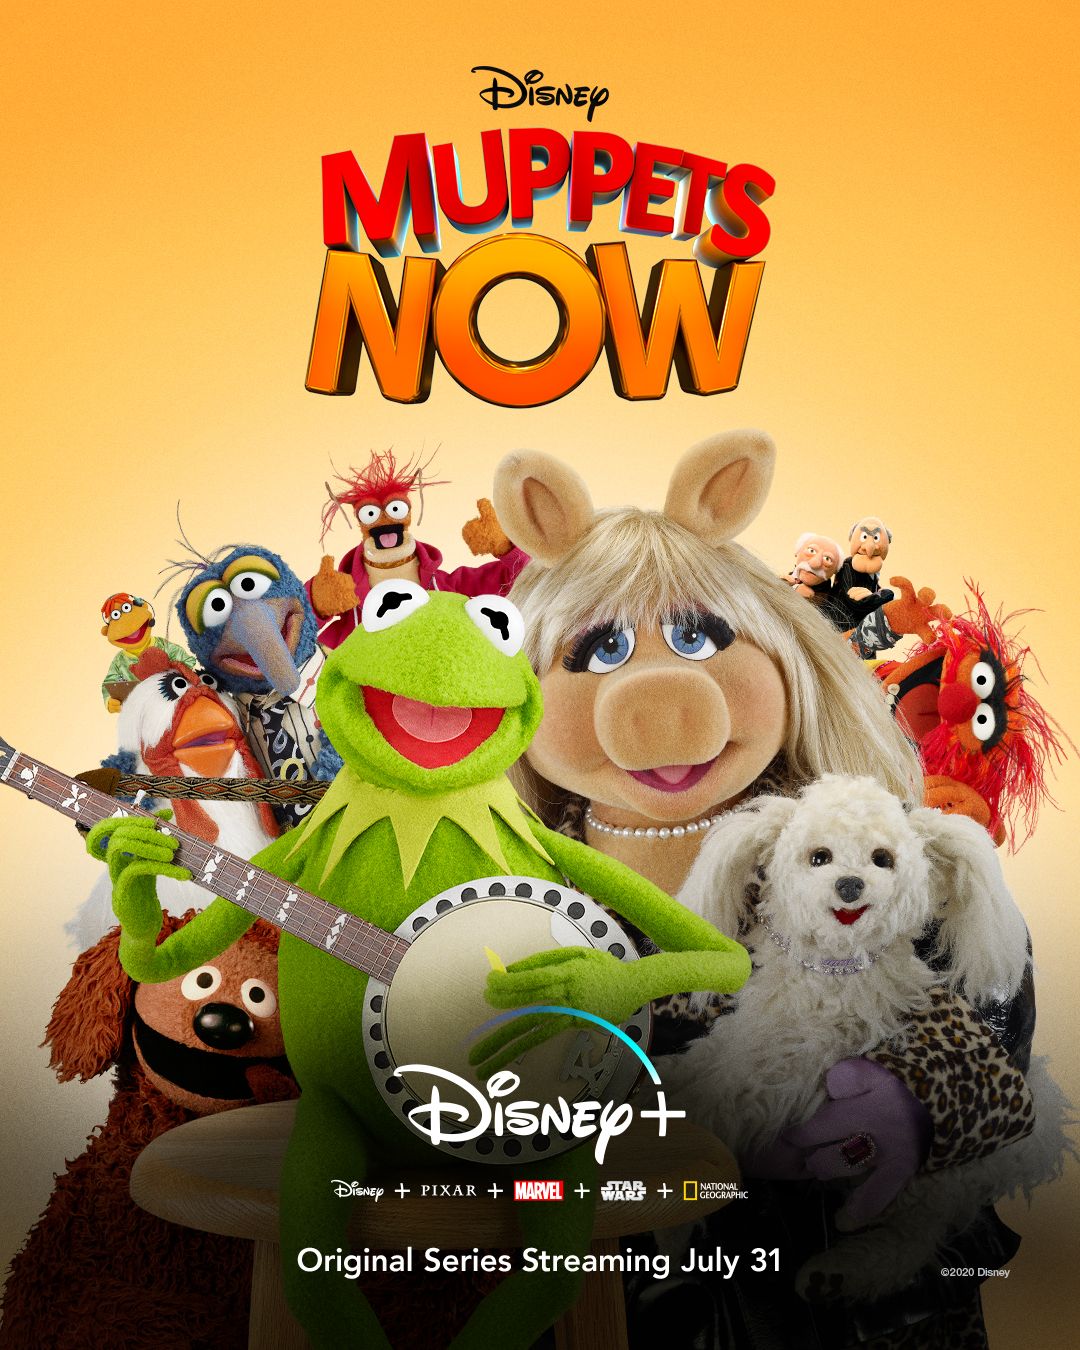 A New 'Muppets' Show Is Coming to Disney Plus